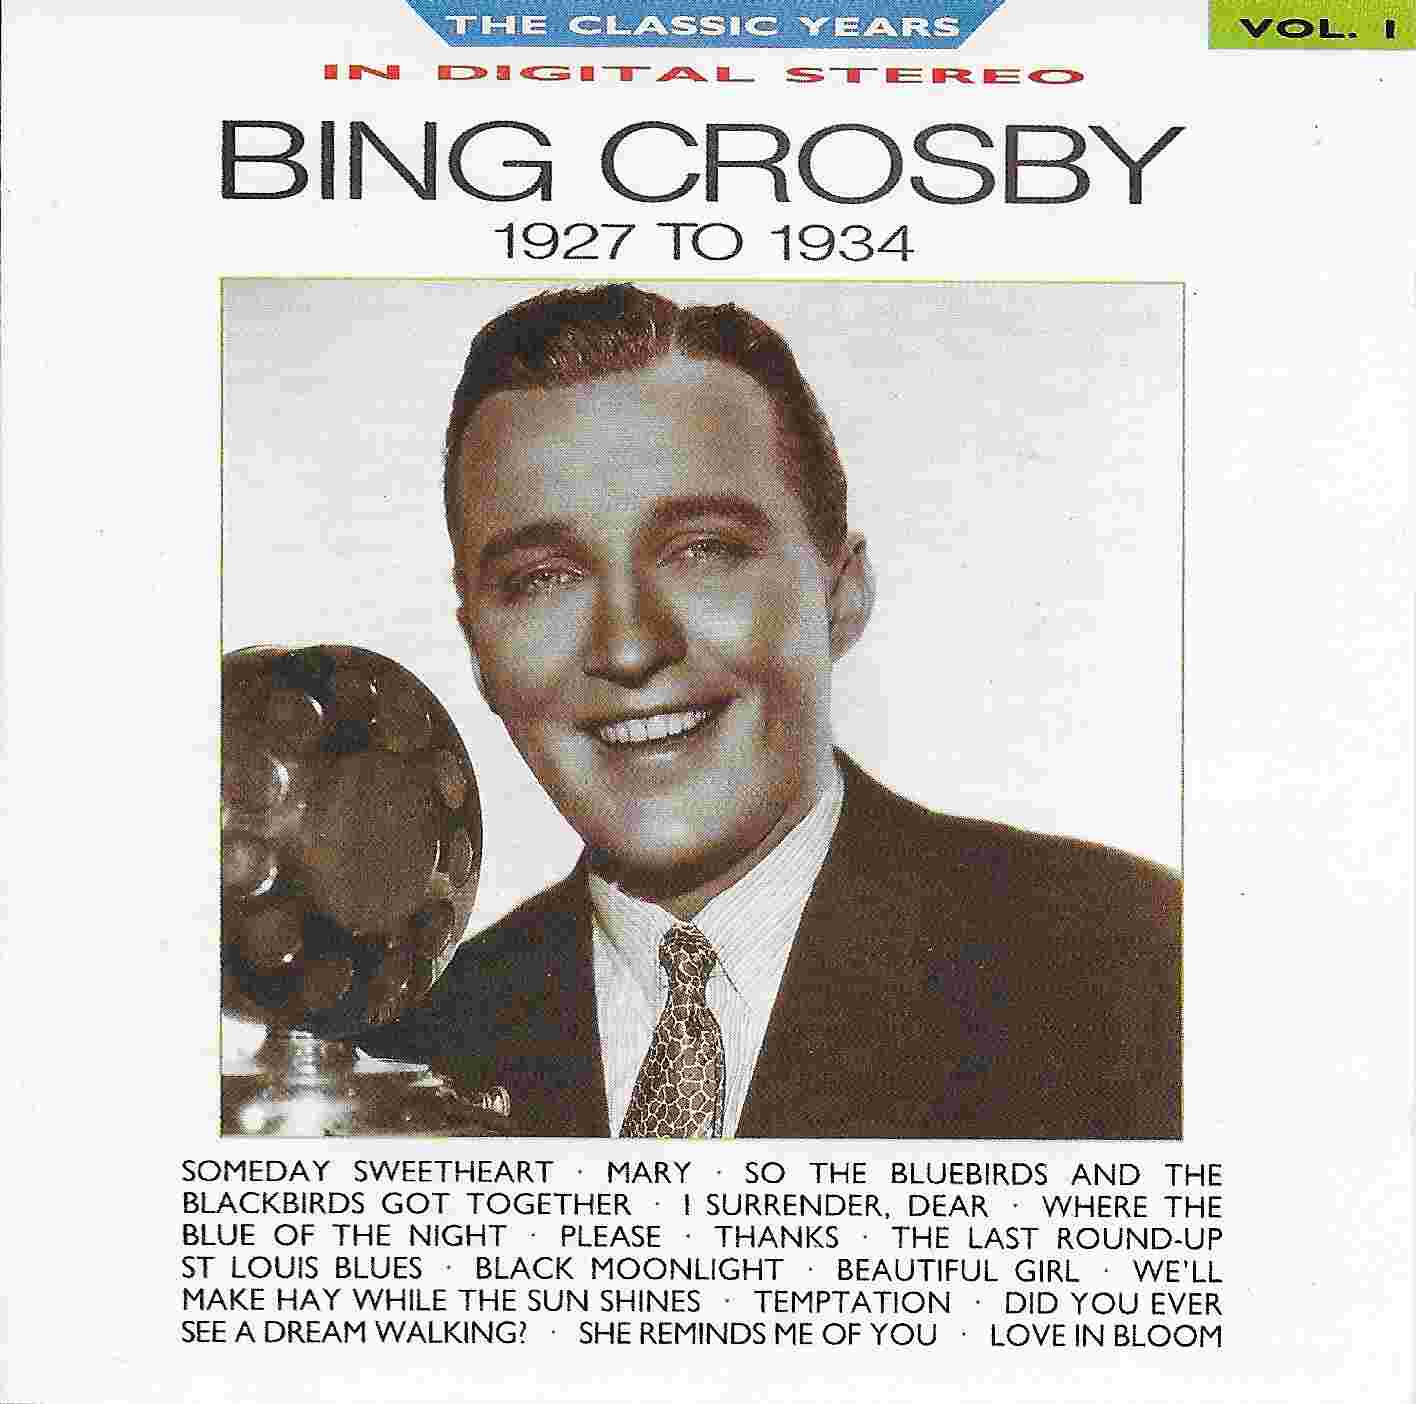 Picture of BBCCD648 Classic years - Volume 1, Bing Crosby by artist Bing Crosby from the BBC cds - Records and Tapes library